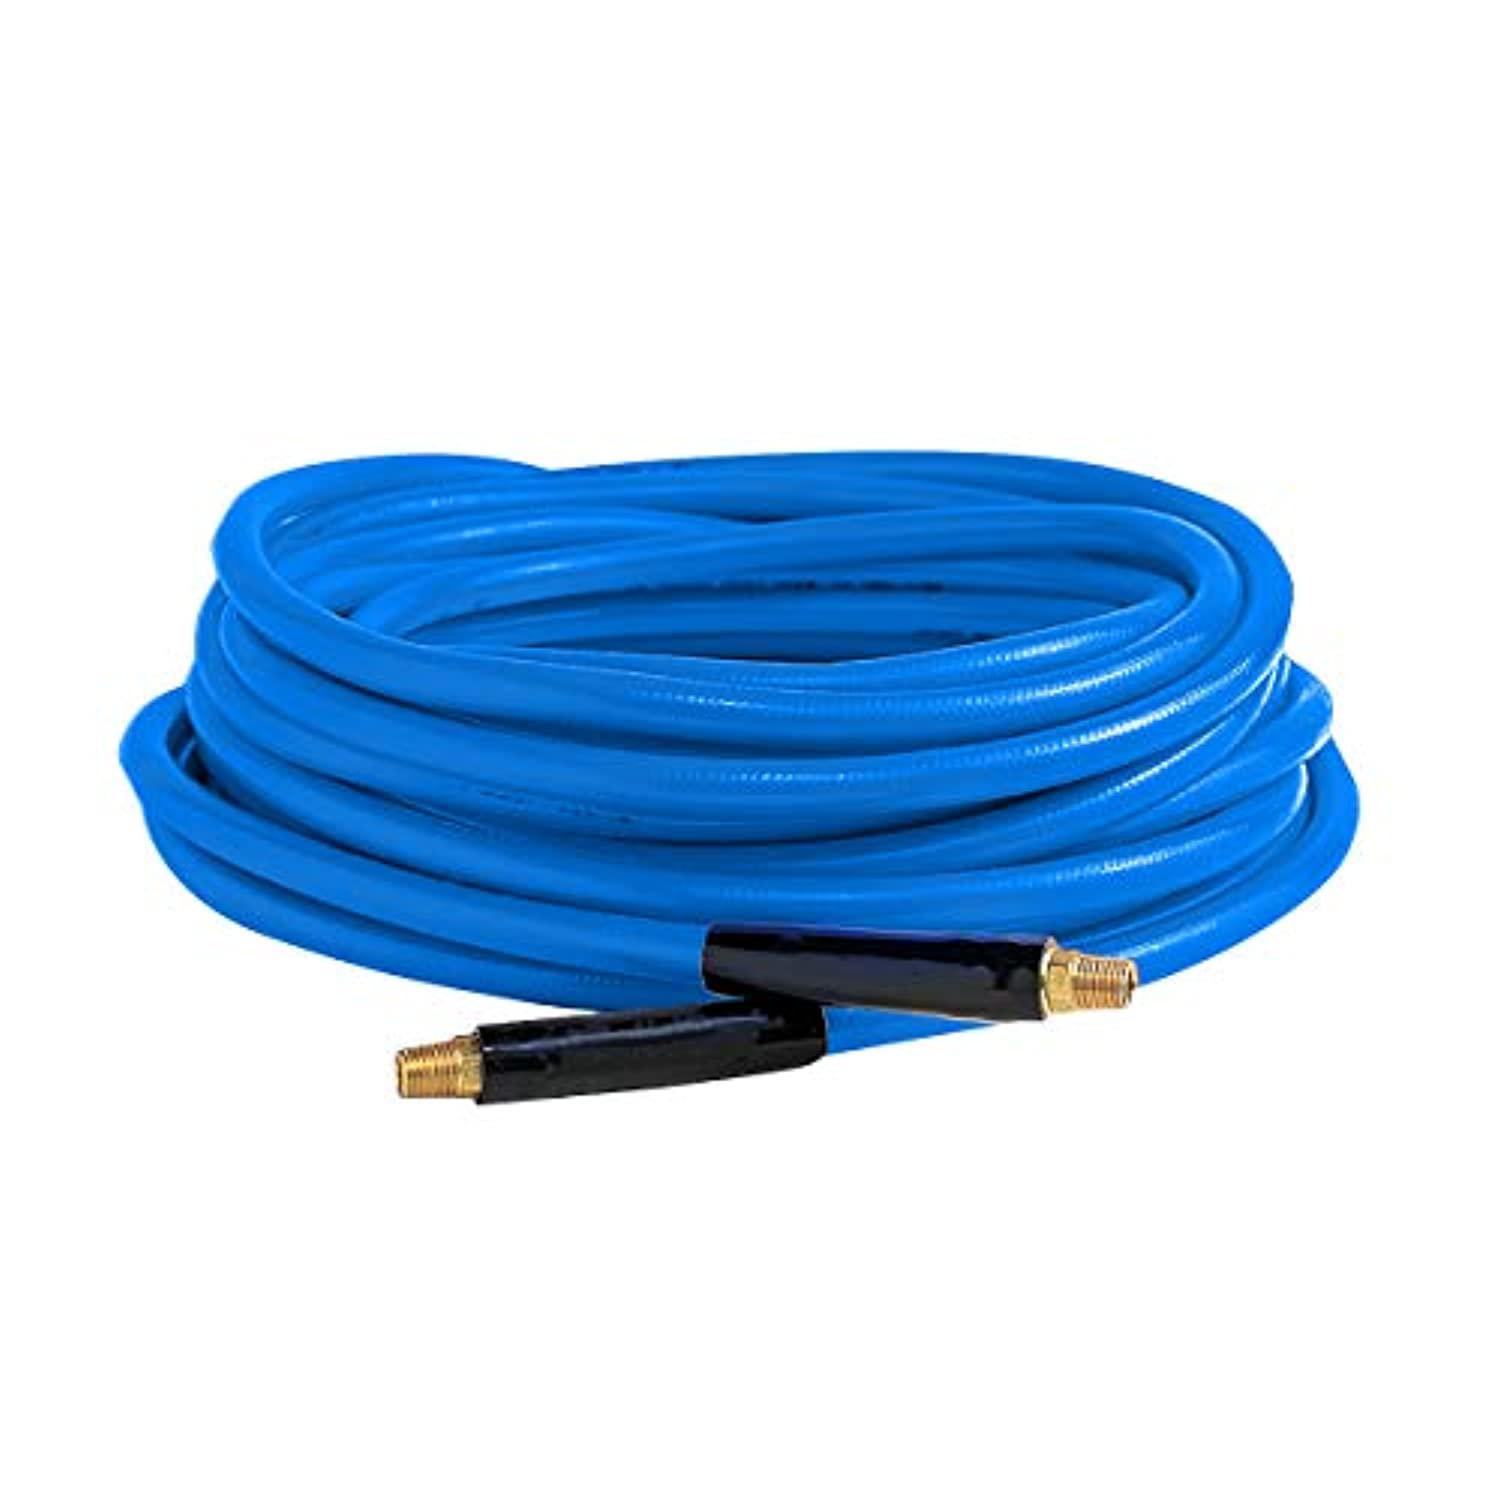 Legacy Manufacturing workforce air hose, 3/8 in. x 25 ft, 1/4 fittings, rubber, blue - hwf3850bl2